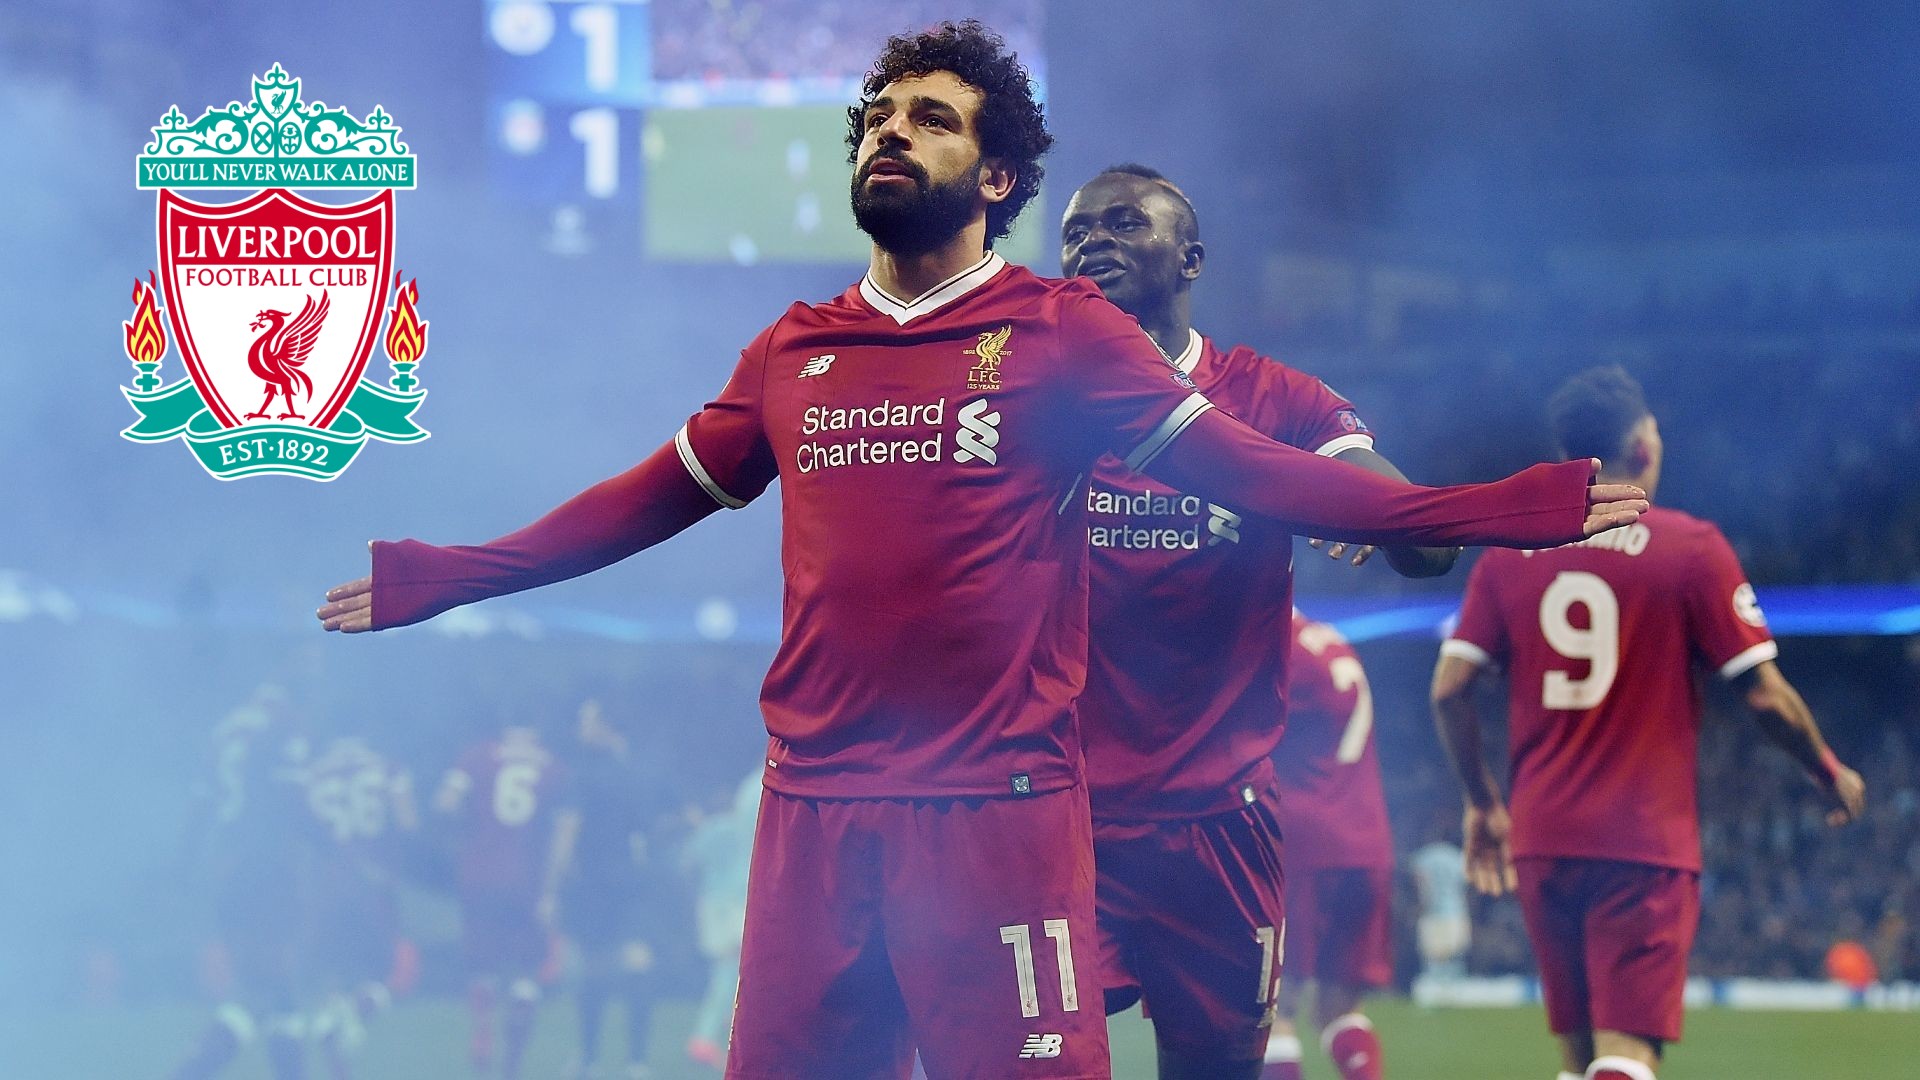 Mohamed Salah Wallpaper For Desktop with resolution 1920X1080 pixel. You can use this wallpaper as background for your desktop Computer Screensavers, Android or iPhone smartphones